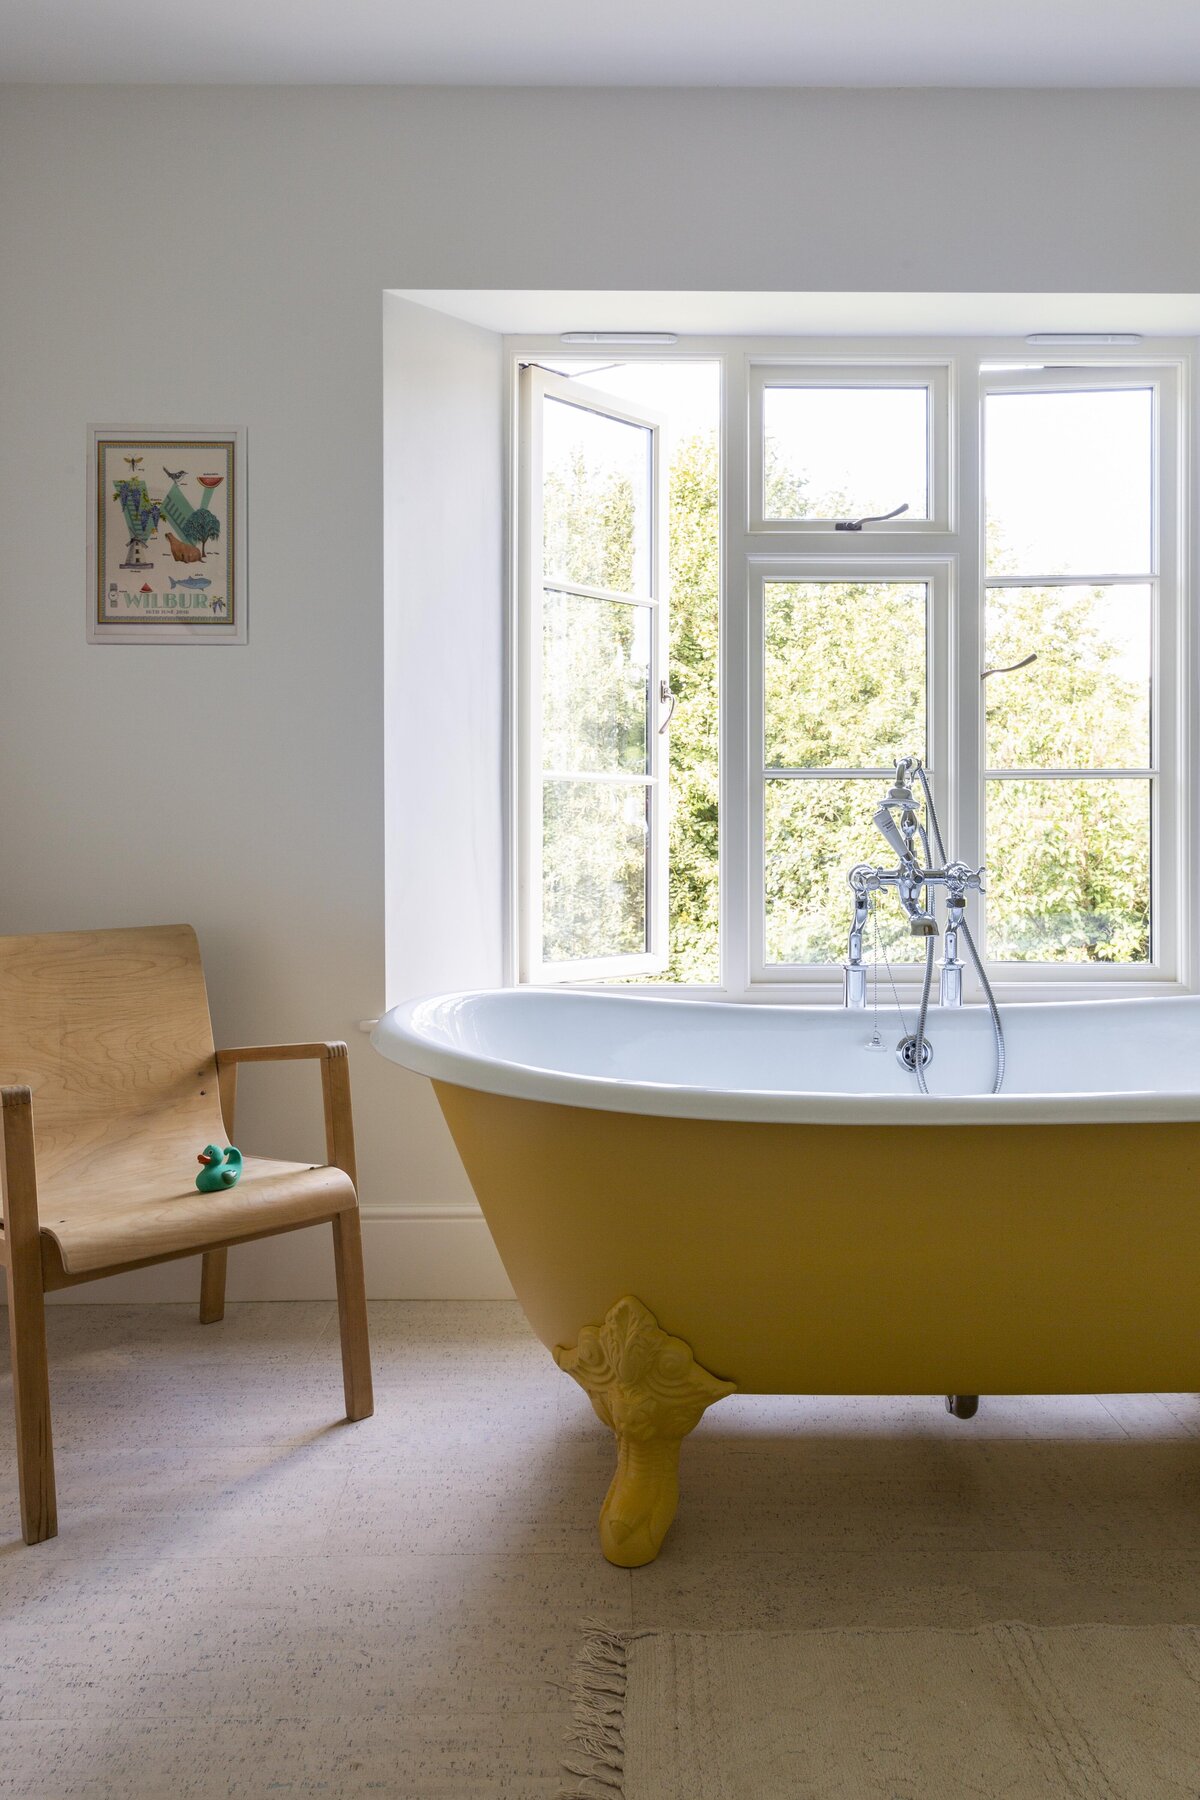 Yellow bath in the window with chair beside